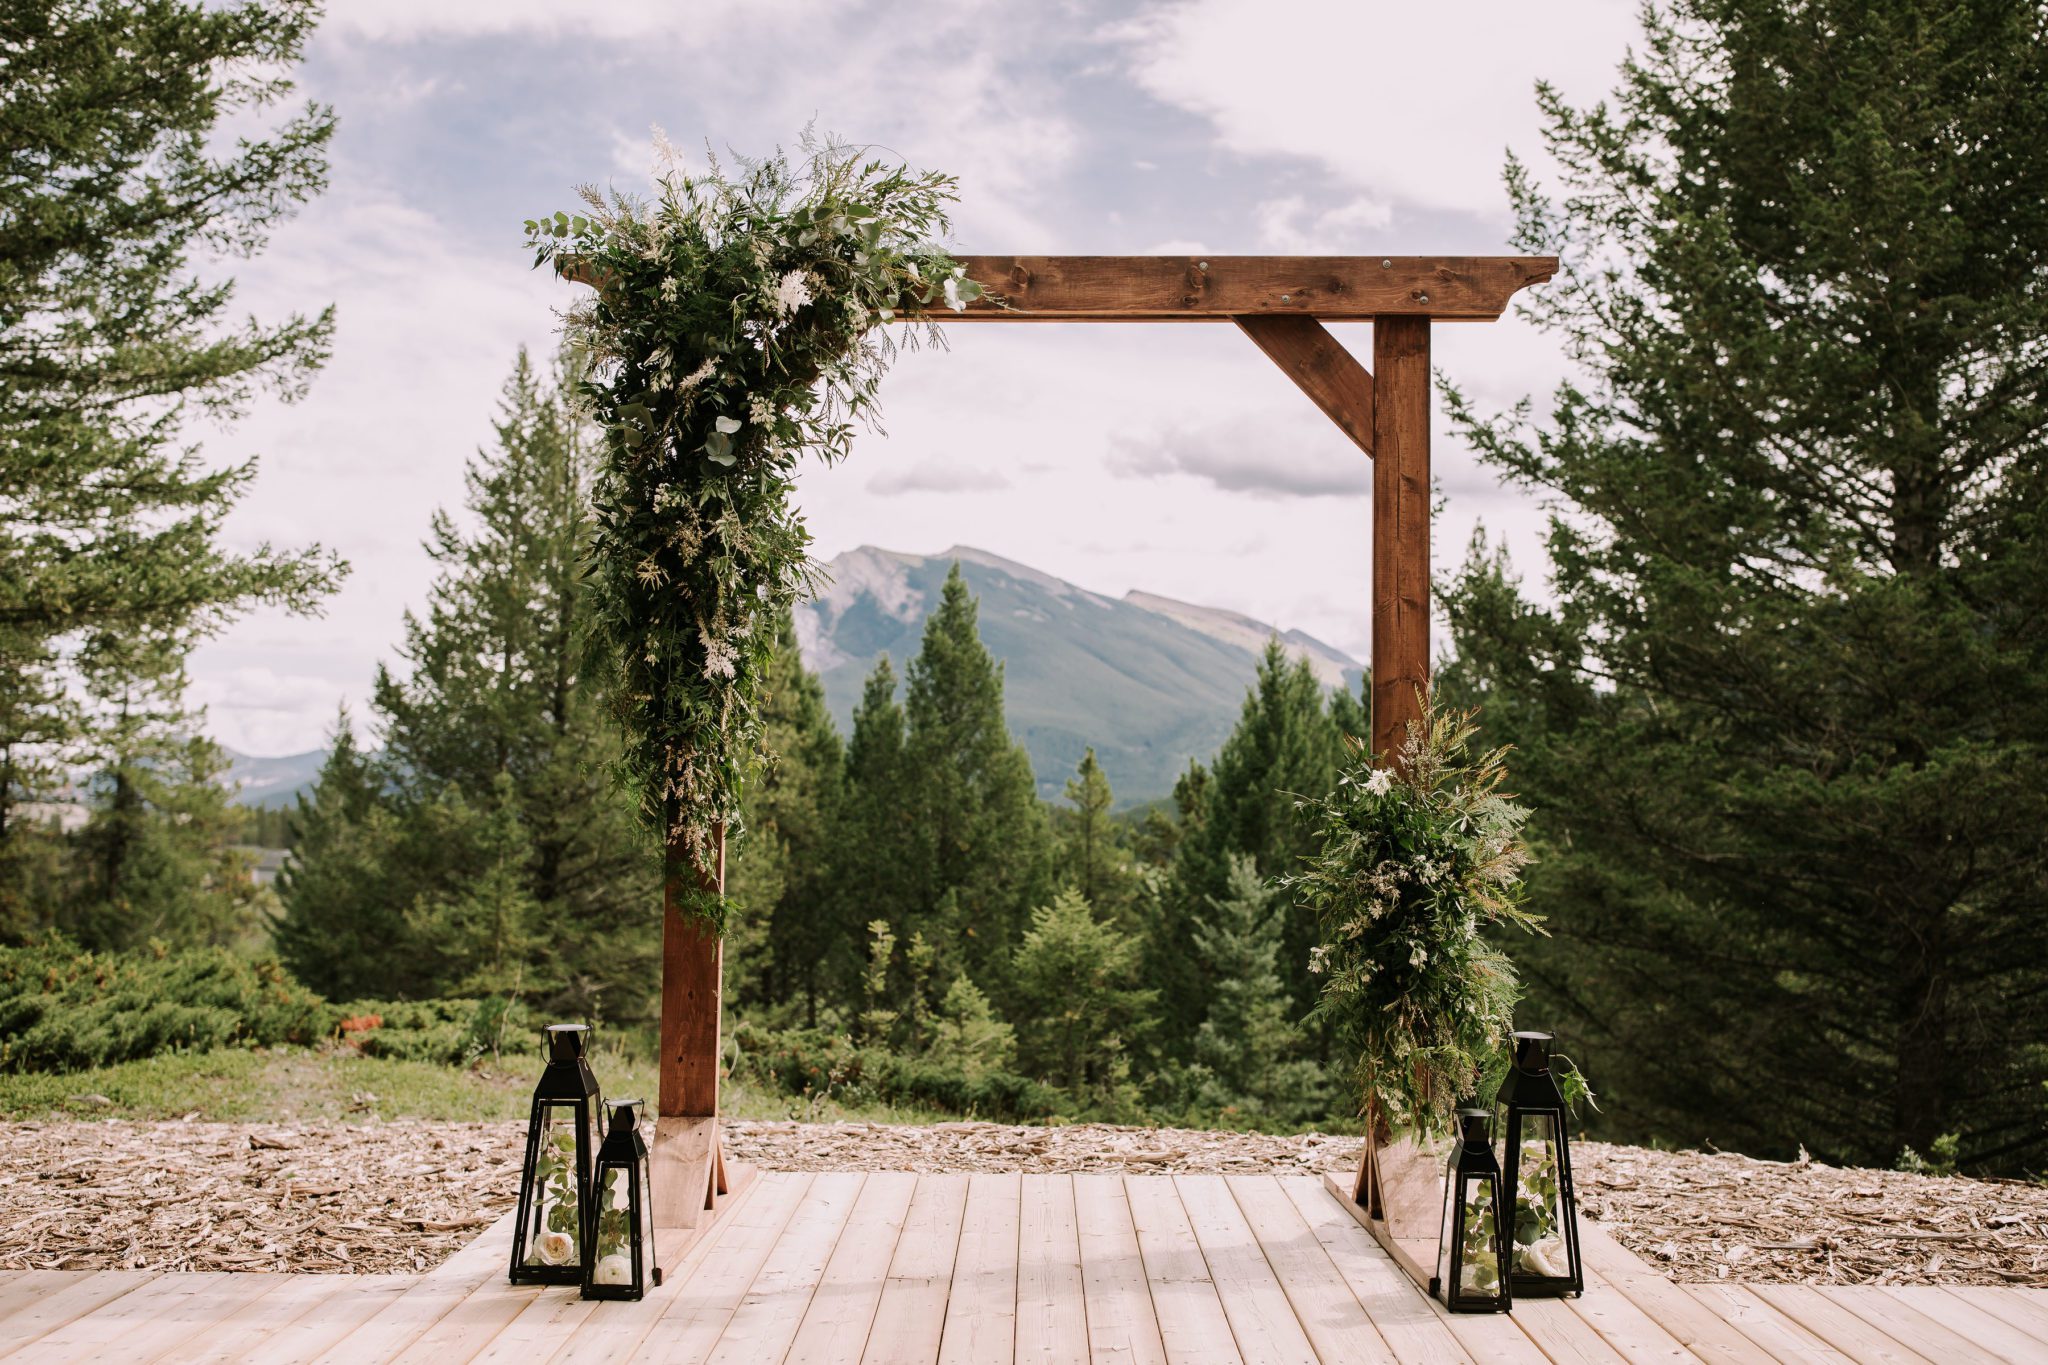 Rustic and nature inspired wedding decor inspiration for a wedding ceremony at Stewart Creek Golf Course